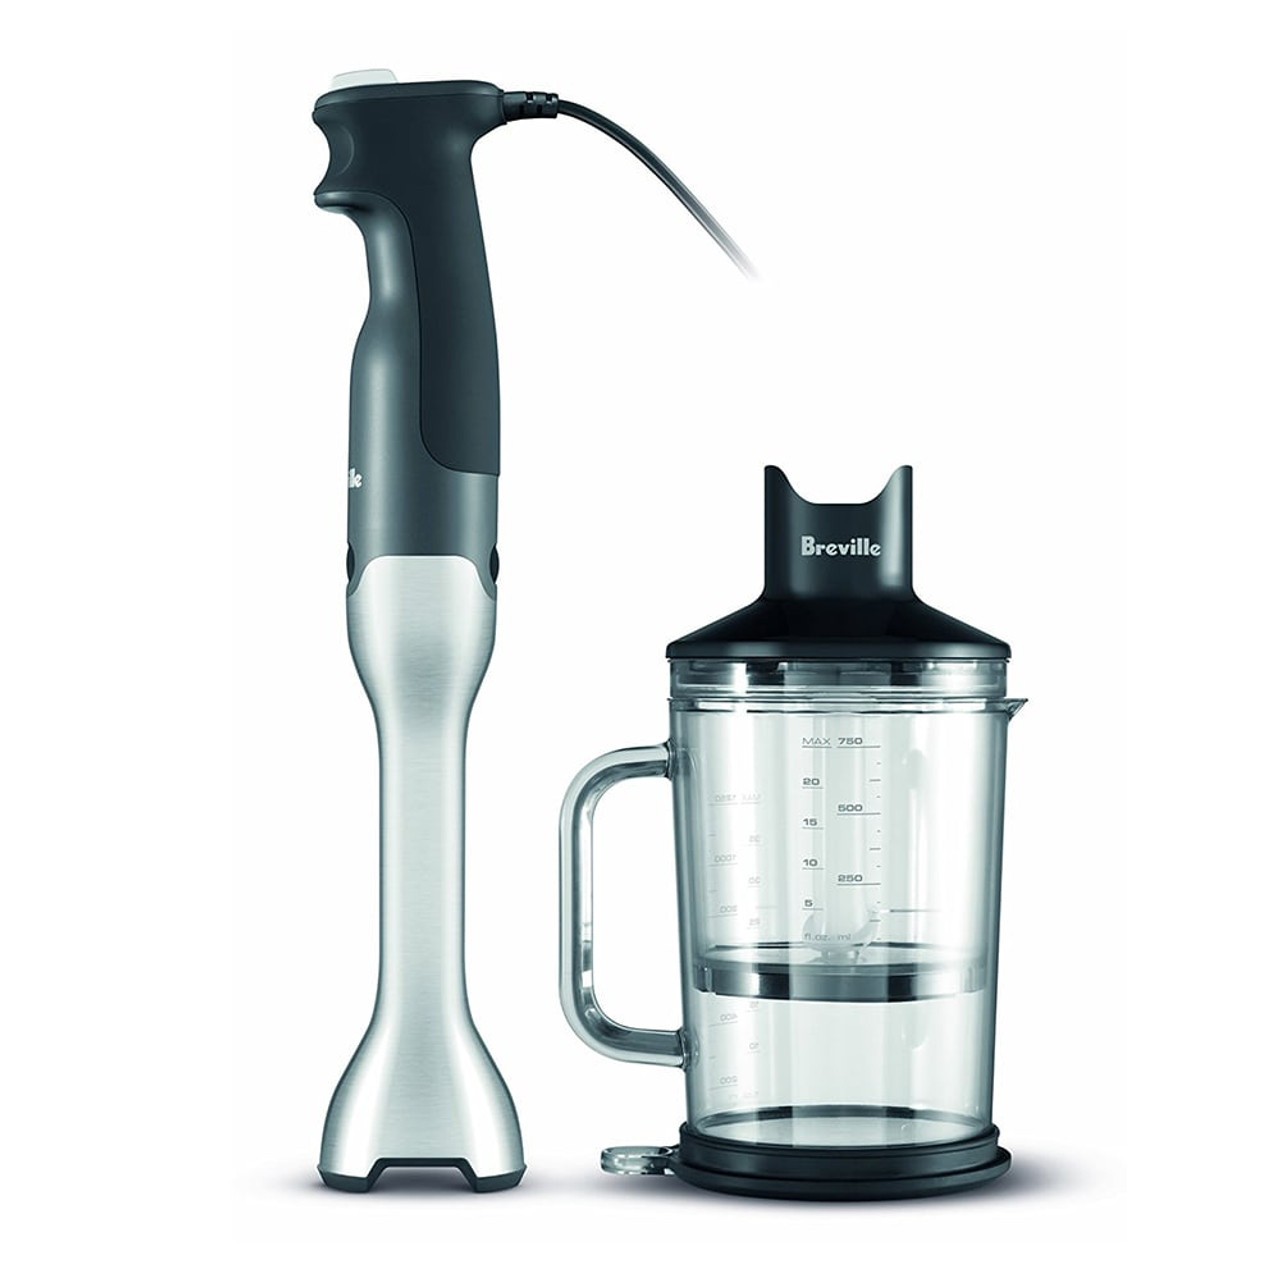 https://cdn11.bigcommerce.com/s-hccytny0od/images/stencil/1280x1280/products/899/2058/breville-control-grip-immersion-blender__54292.1594155788.jpg?c=2?imbypass=on